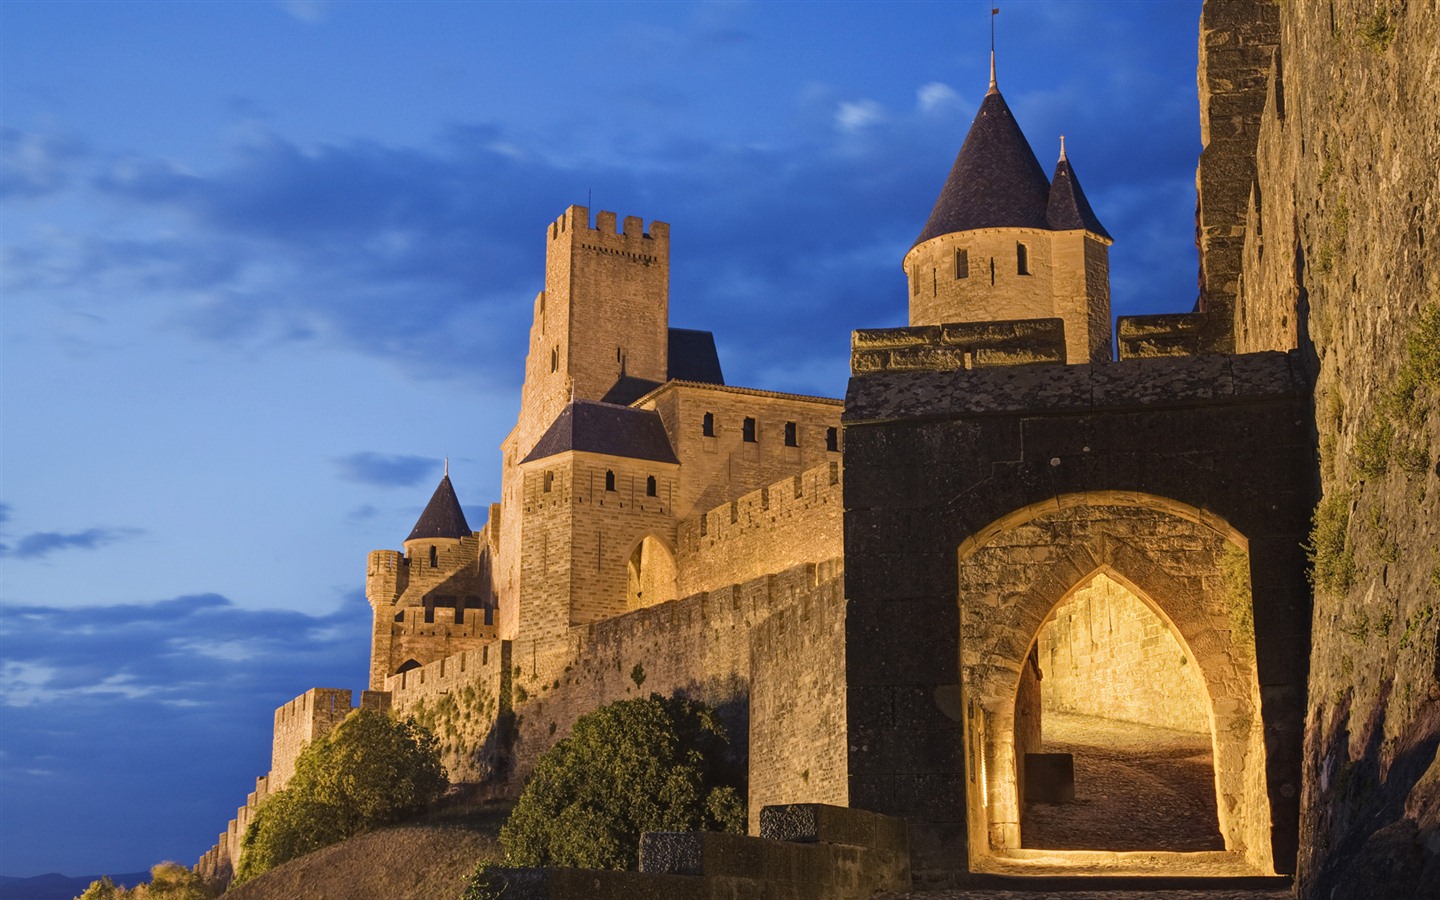 Windows 7 Wallpapers: Castles of Europe #4 - 1440x900